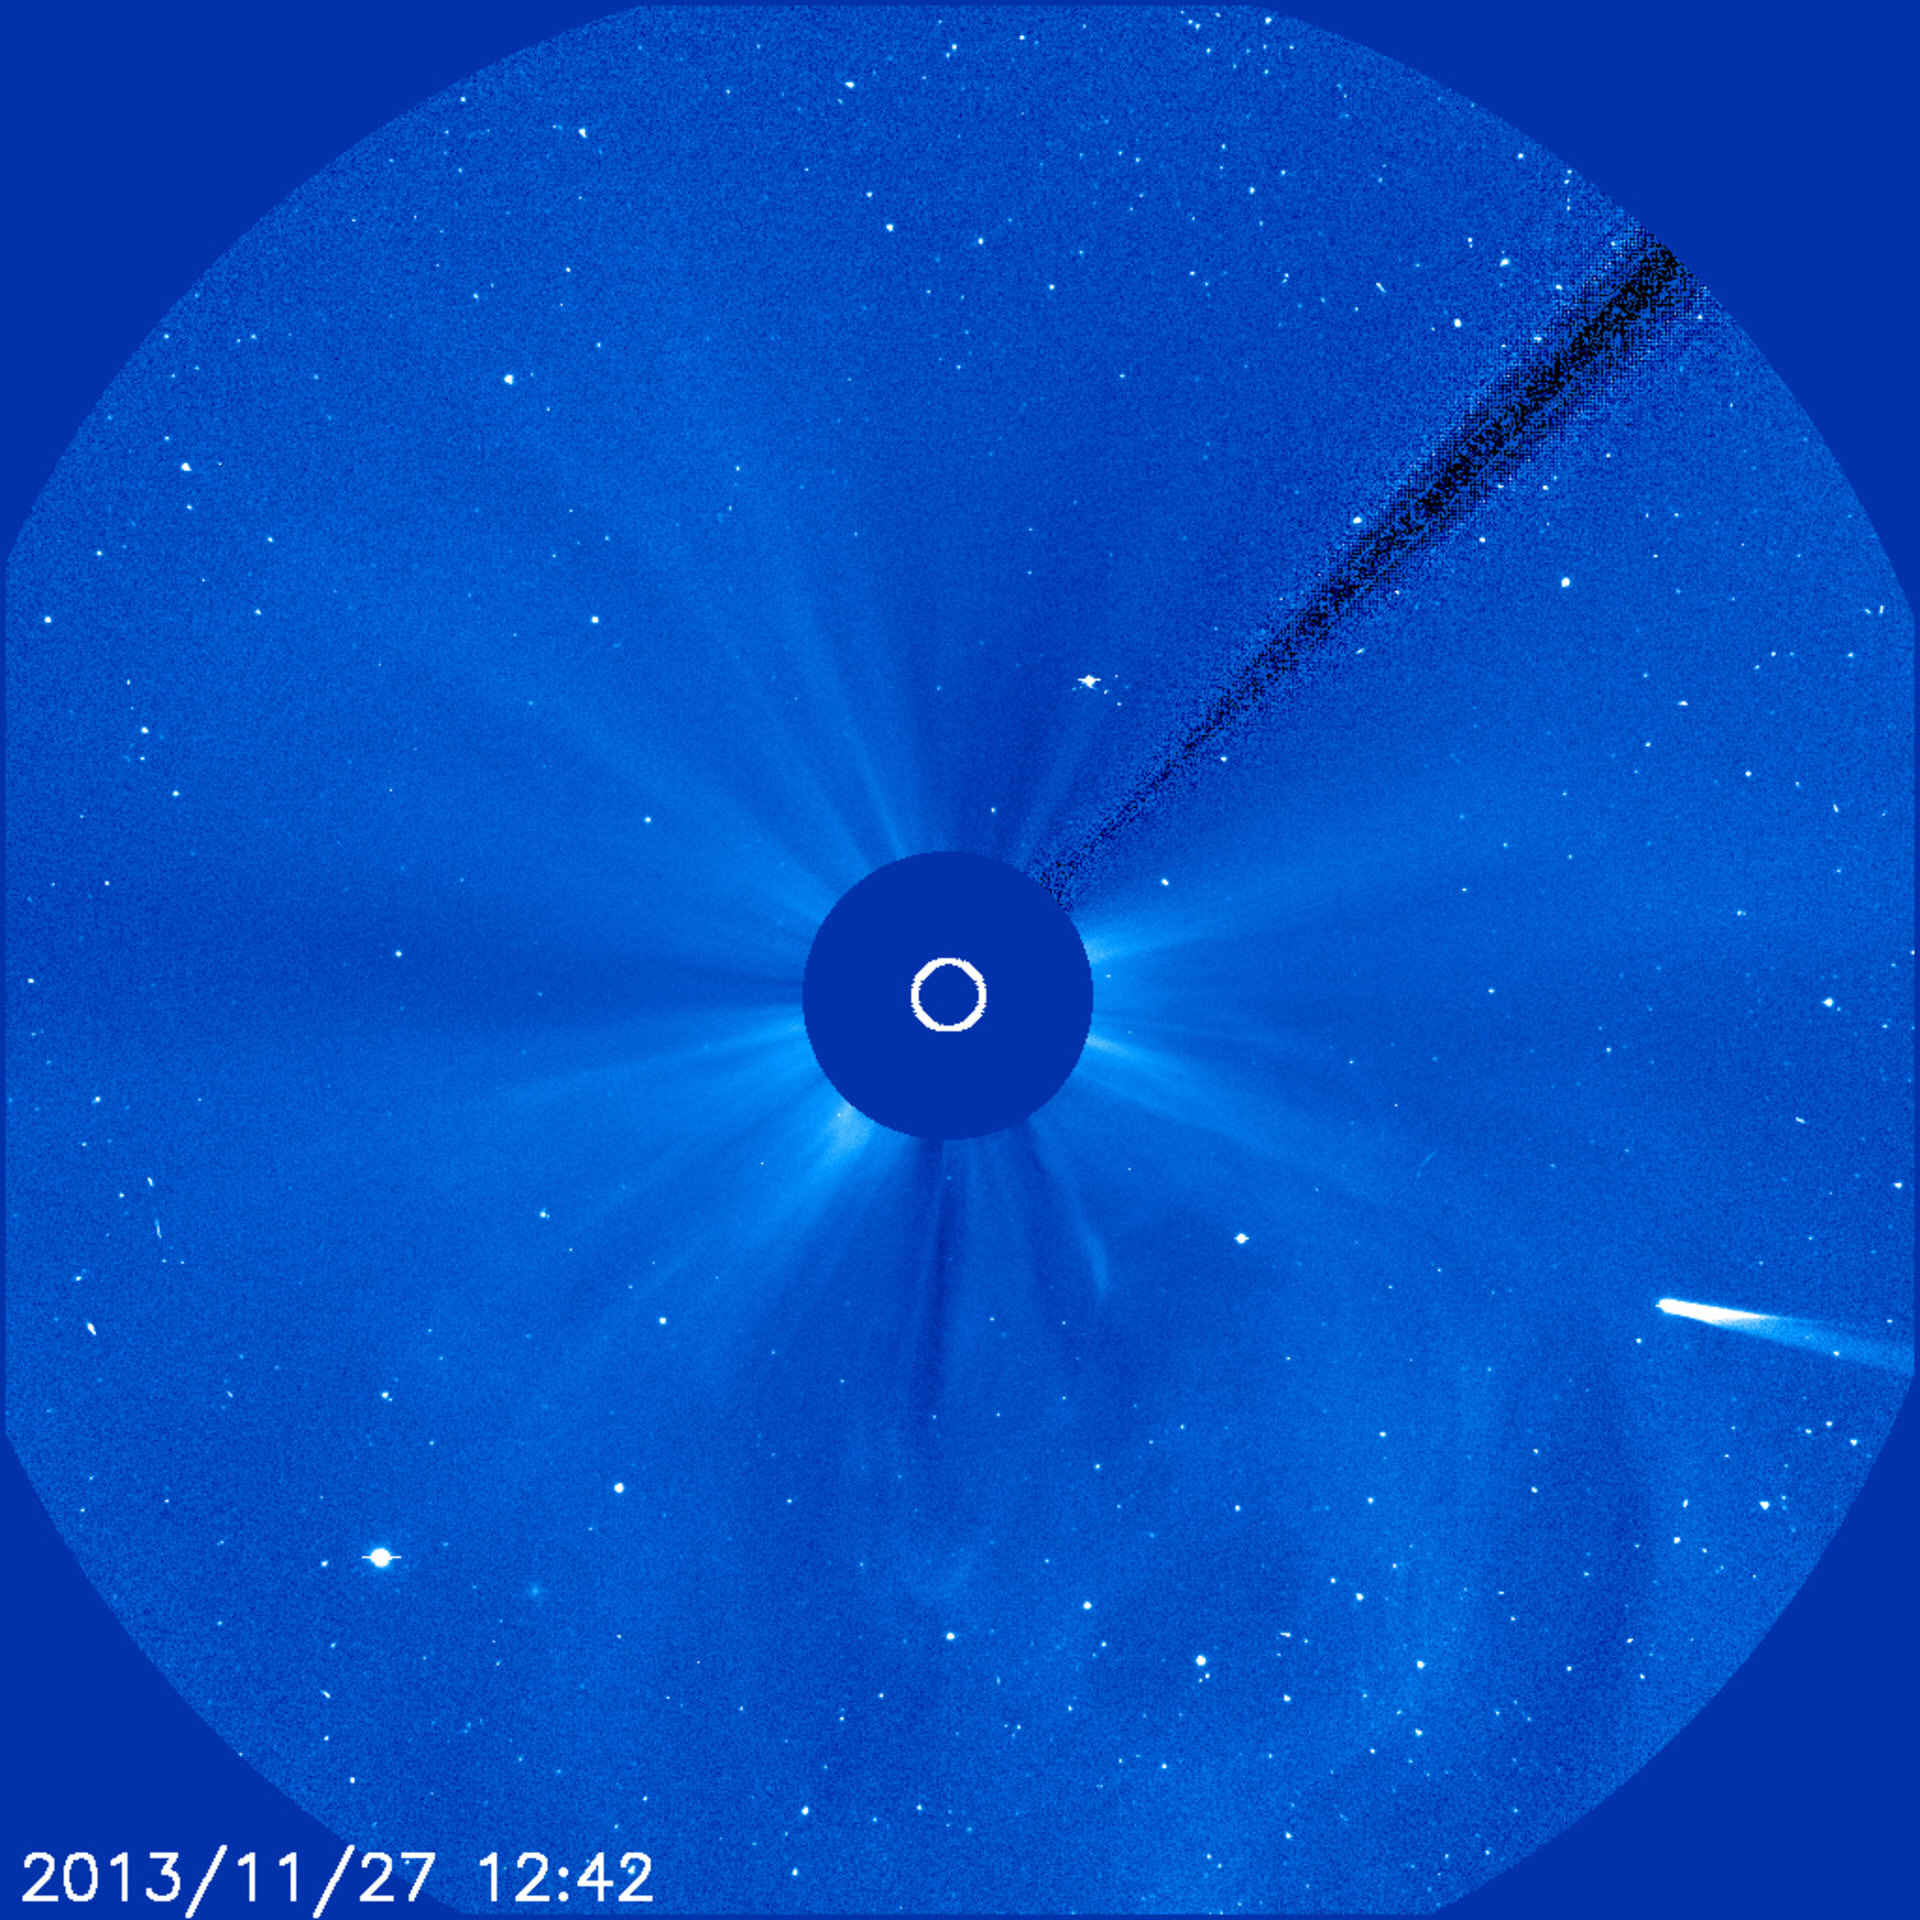 Comet ISON approaches the Sun